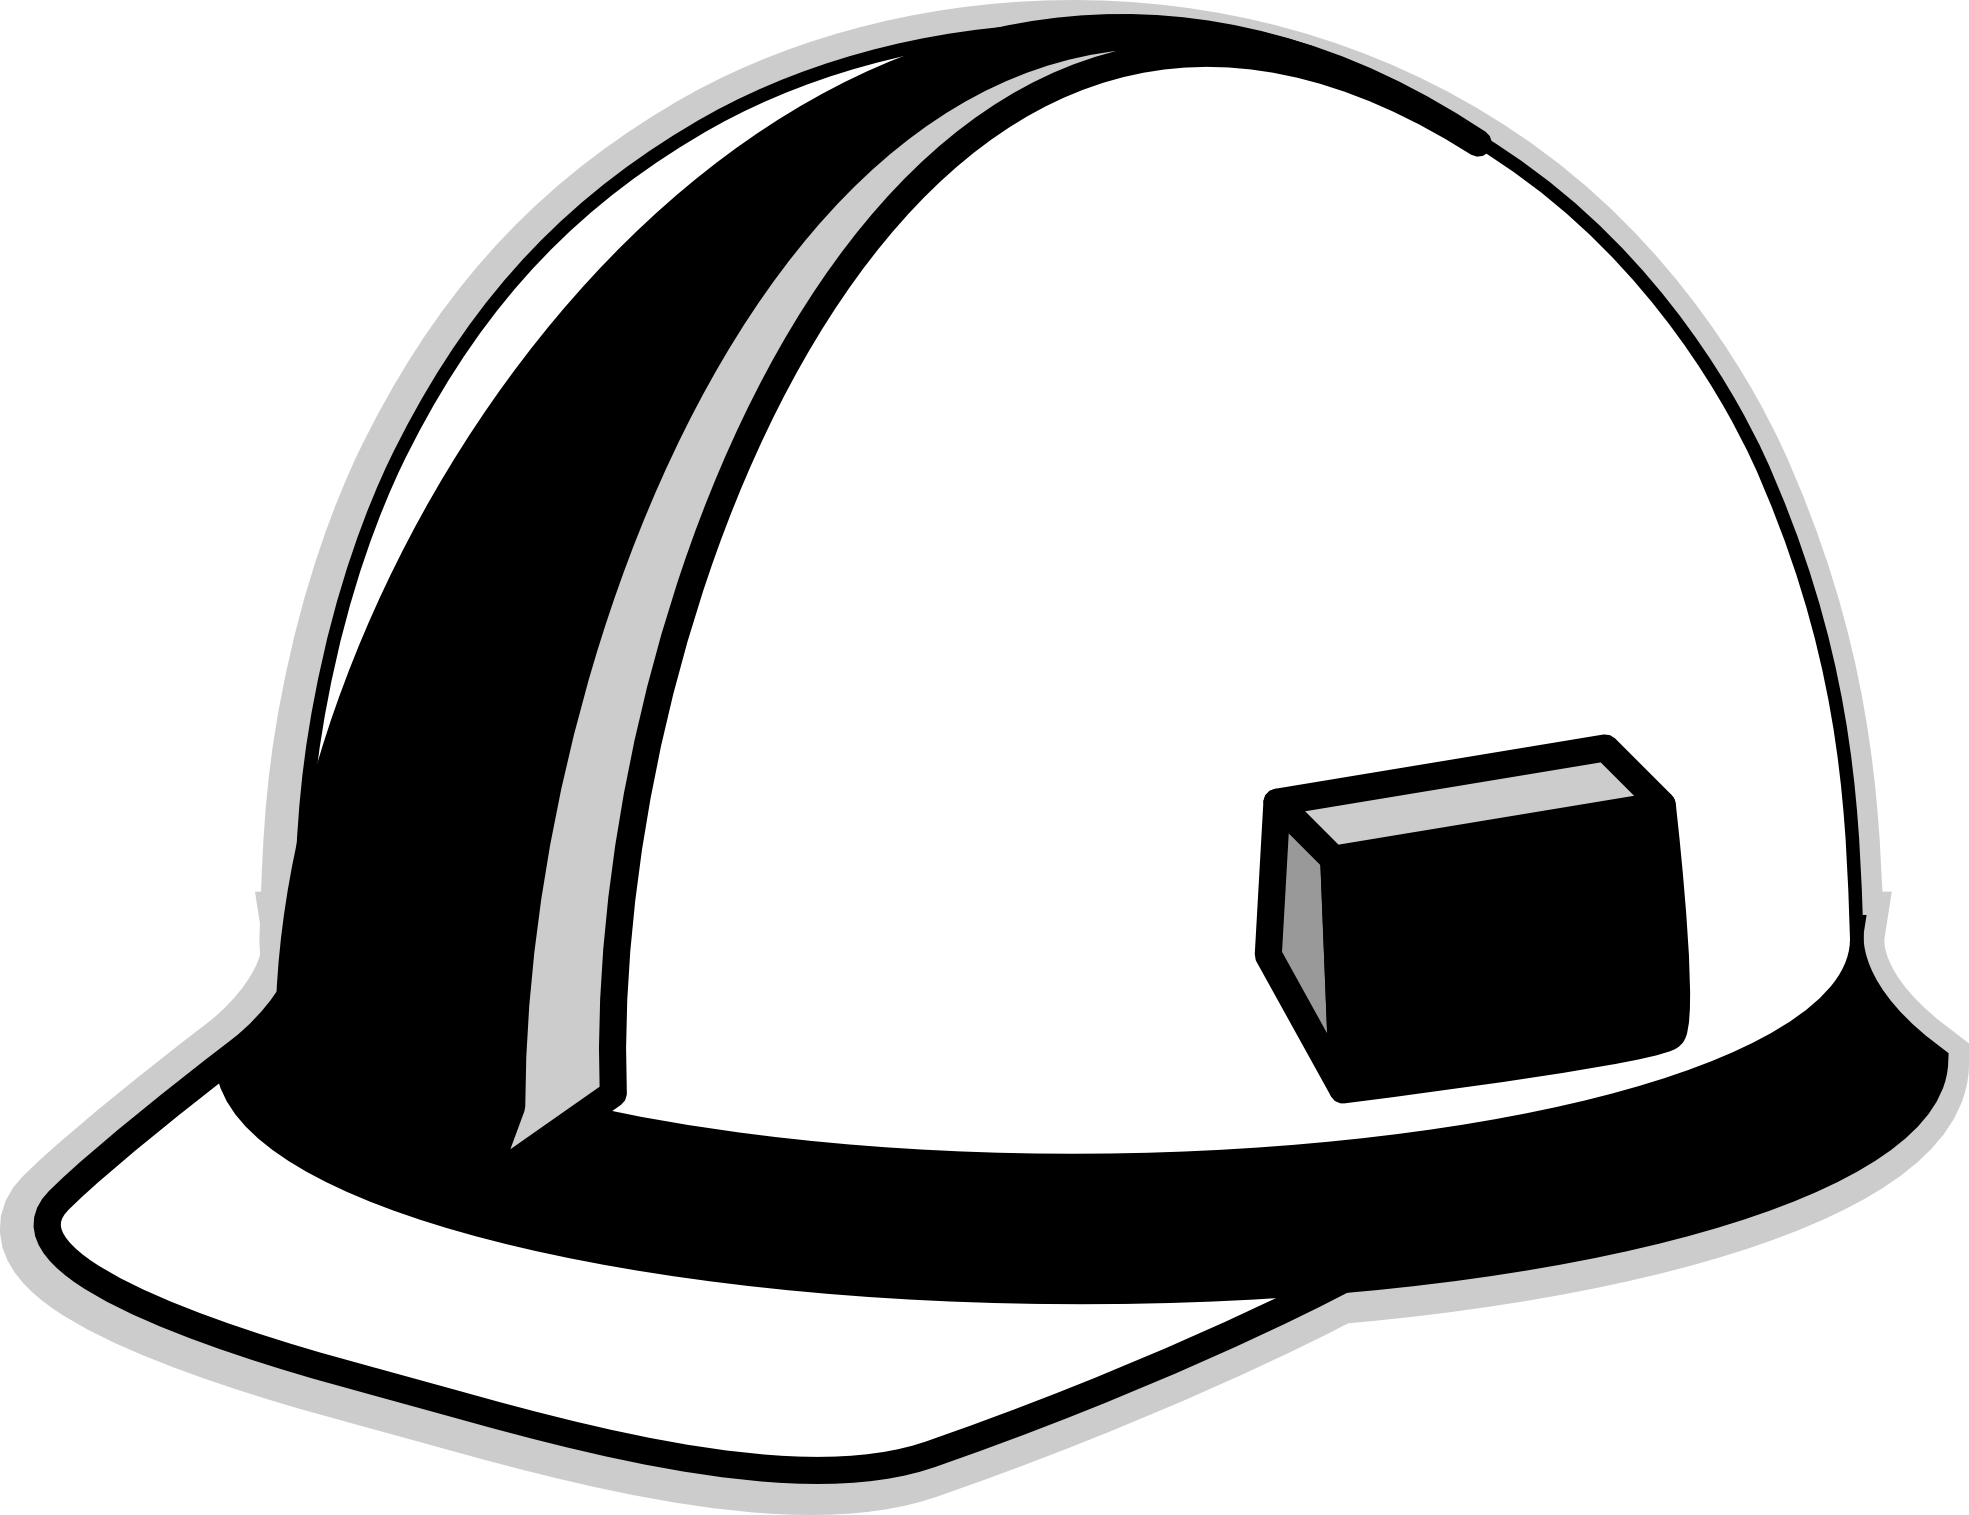 10 Hard Hat Graphics   Free Cliparts That You Can Download To You